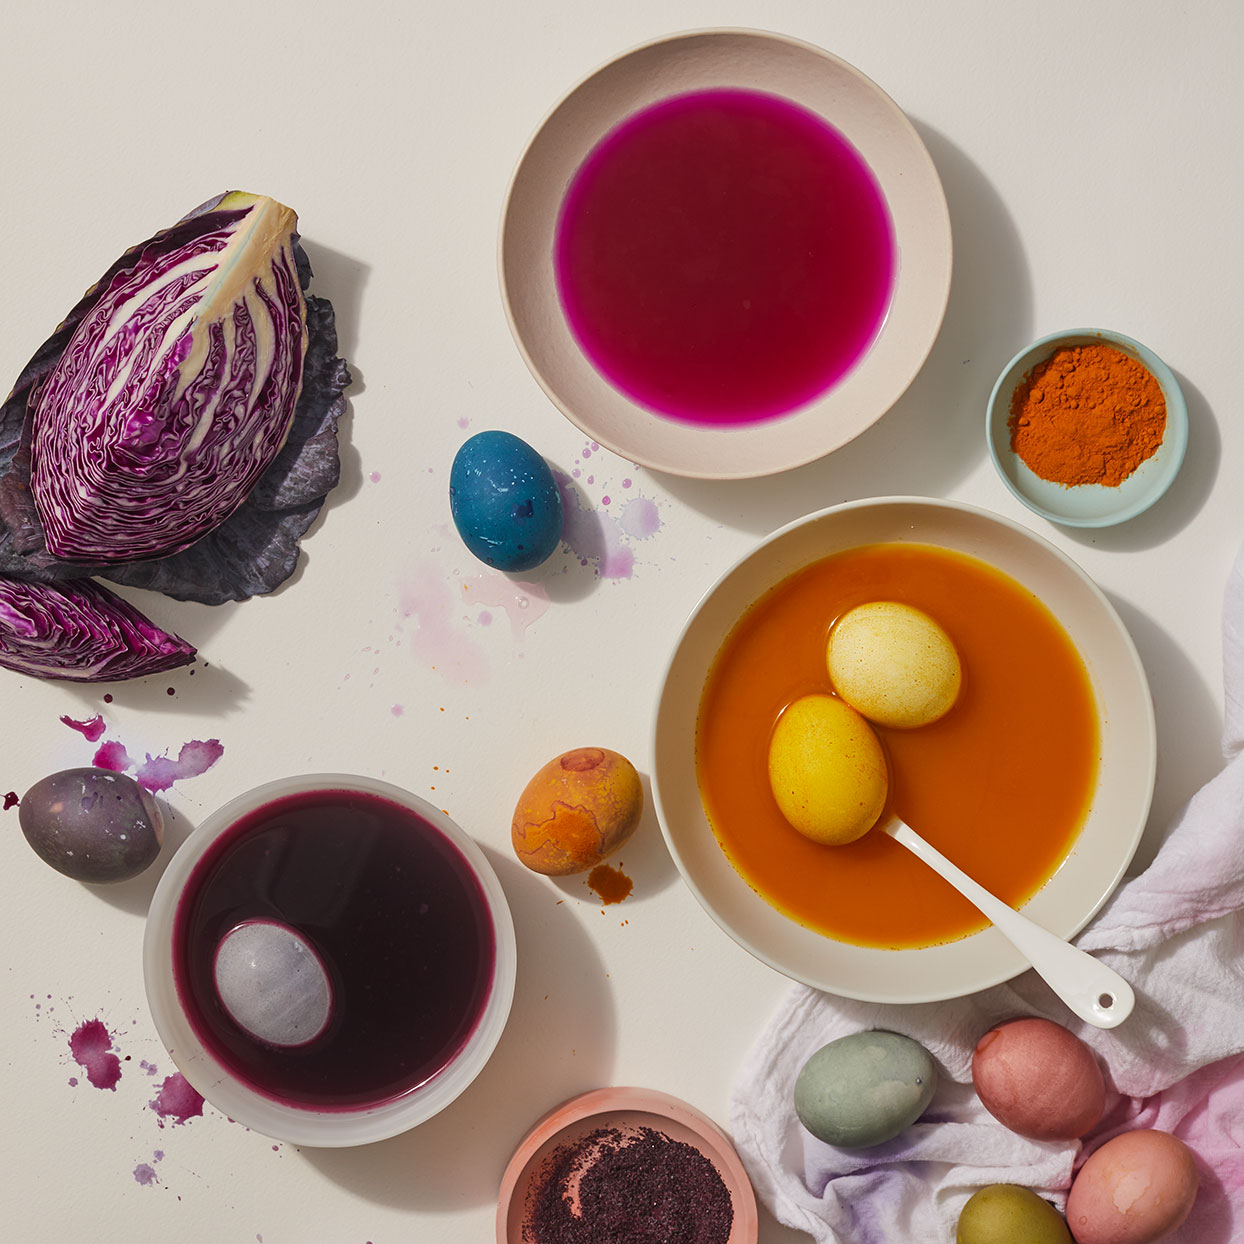 natural dyes, like onion skins, to produce decorative effects.